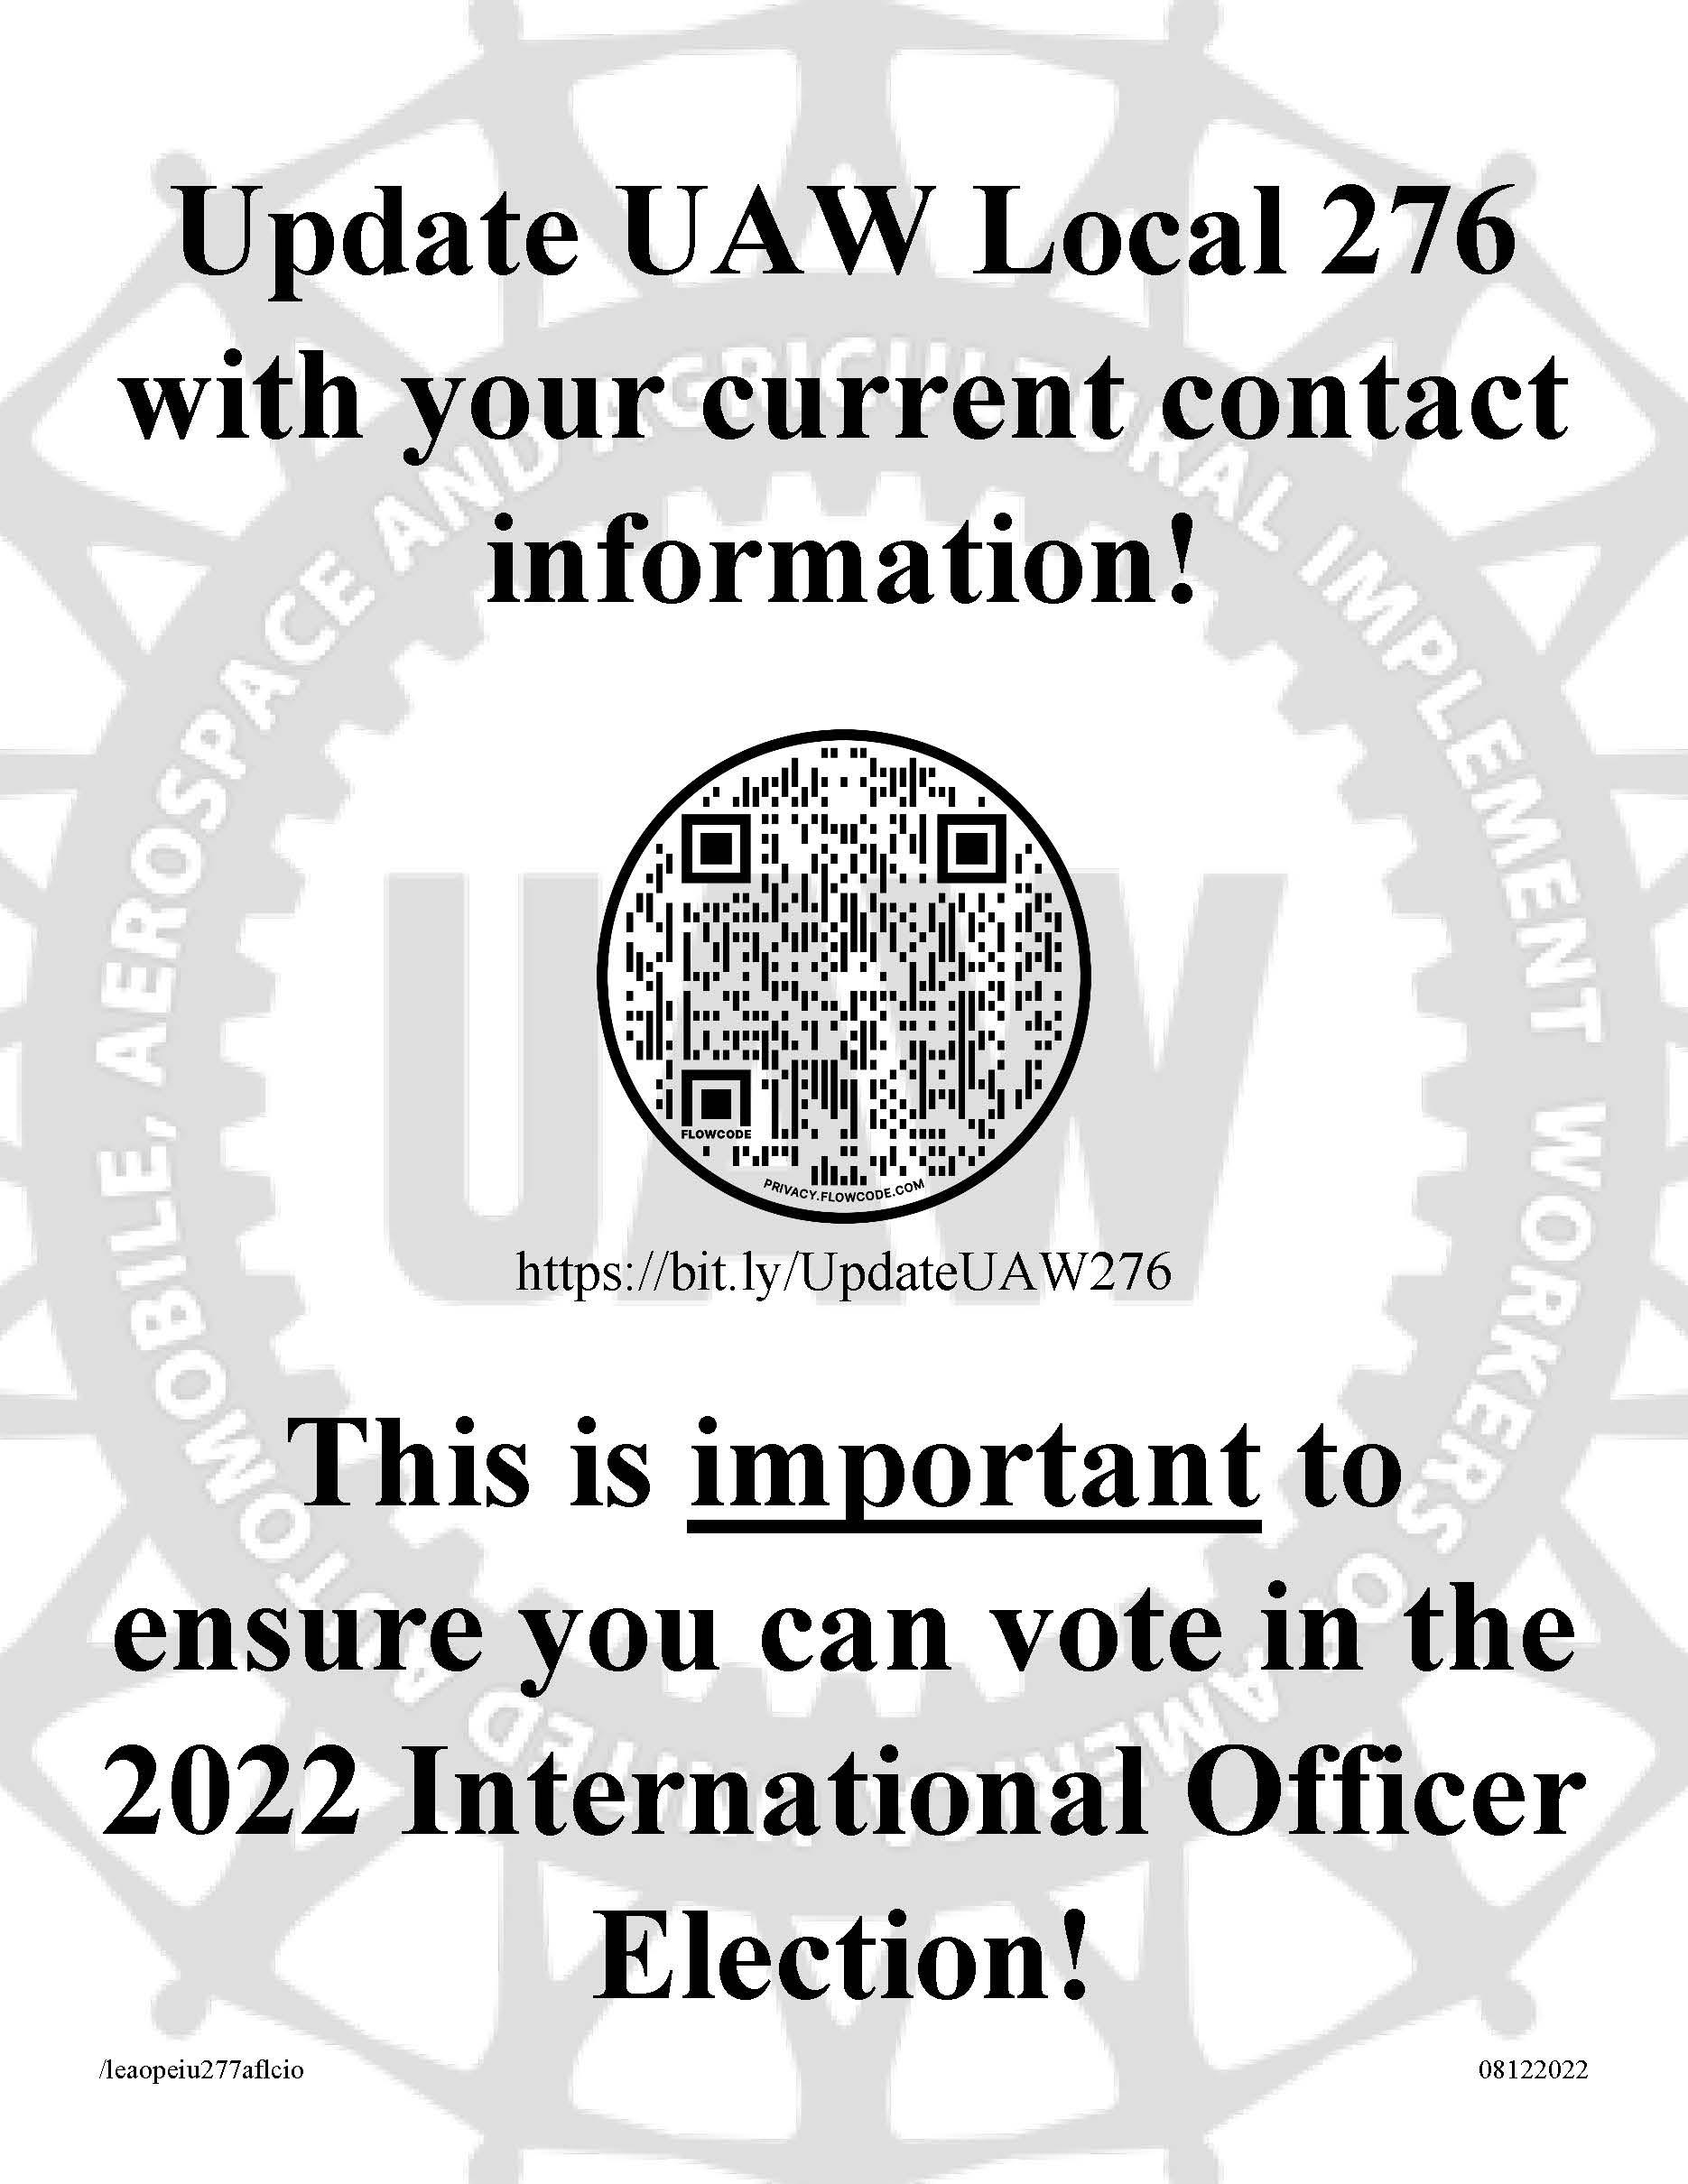 Update UAW Local 276 UAW Local 276